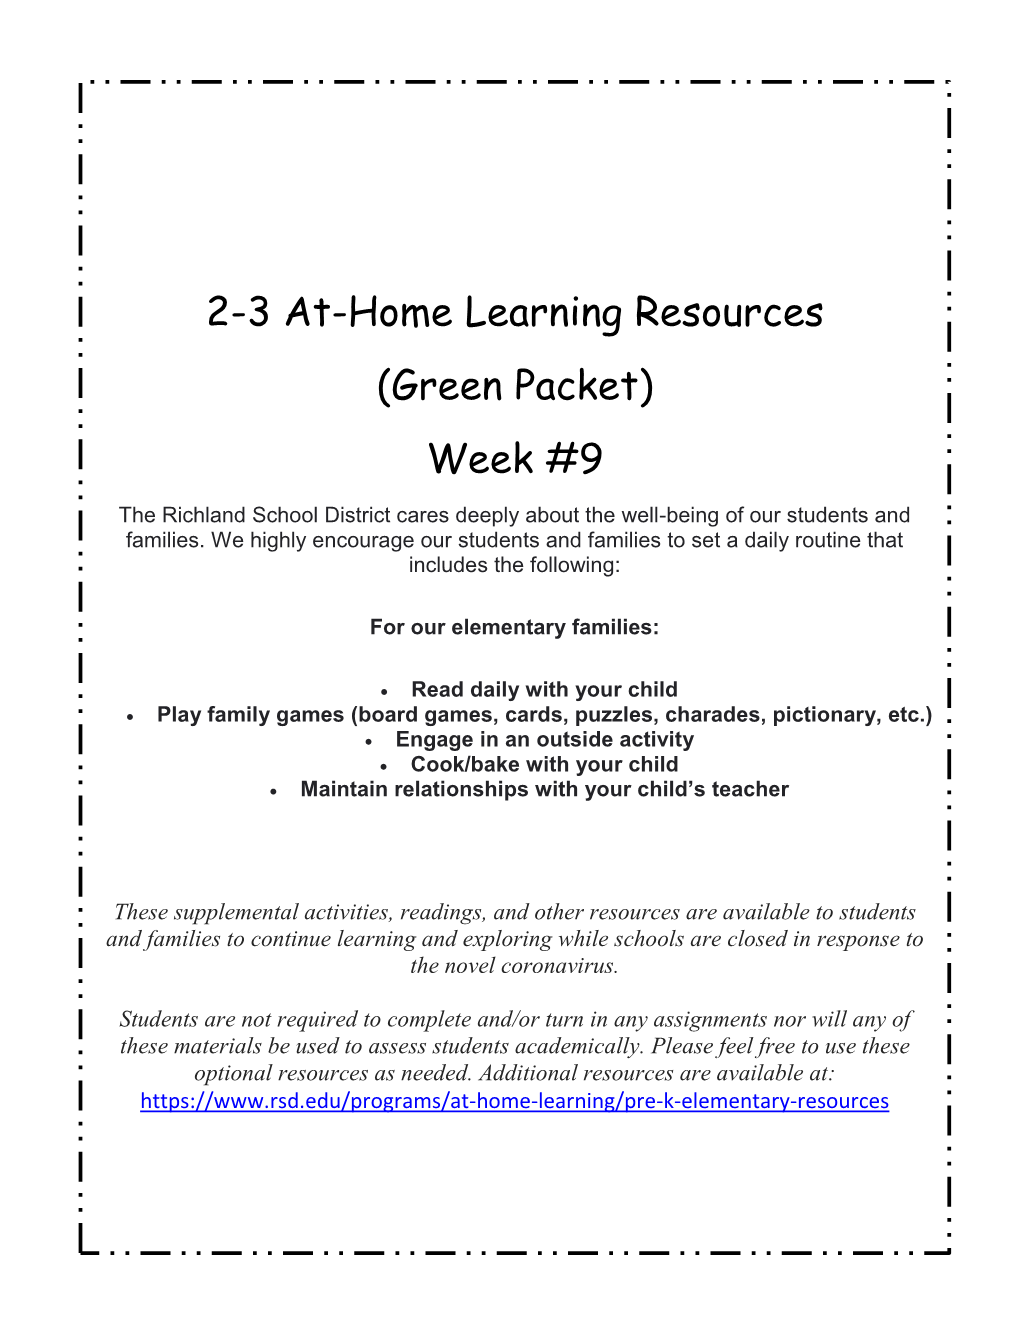 2-3 At-Home Learning Resources (Green Packet) Week #9